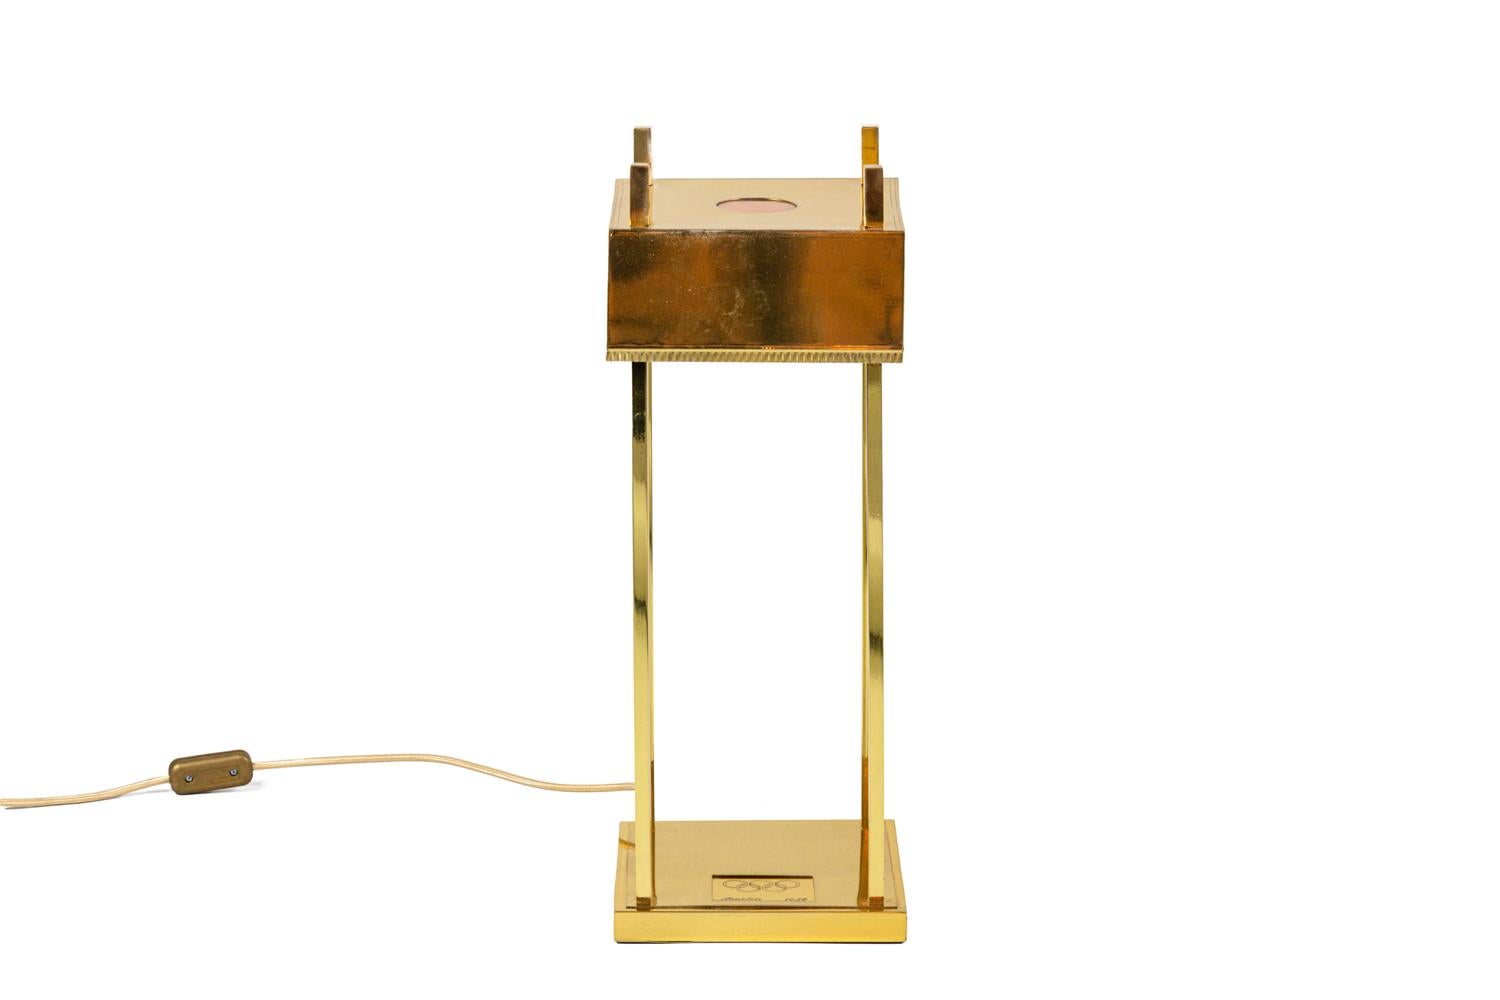 Lamp in gilt brass with a square lampshade adorned with copper rounds and a trygliphs frieze. It stands on four square section sticks fixed on a square base engraved with the Olympic Games logo.

Numbered 1357 and engraved “WerkeAG” on the